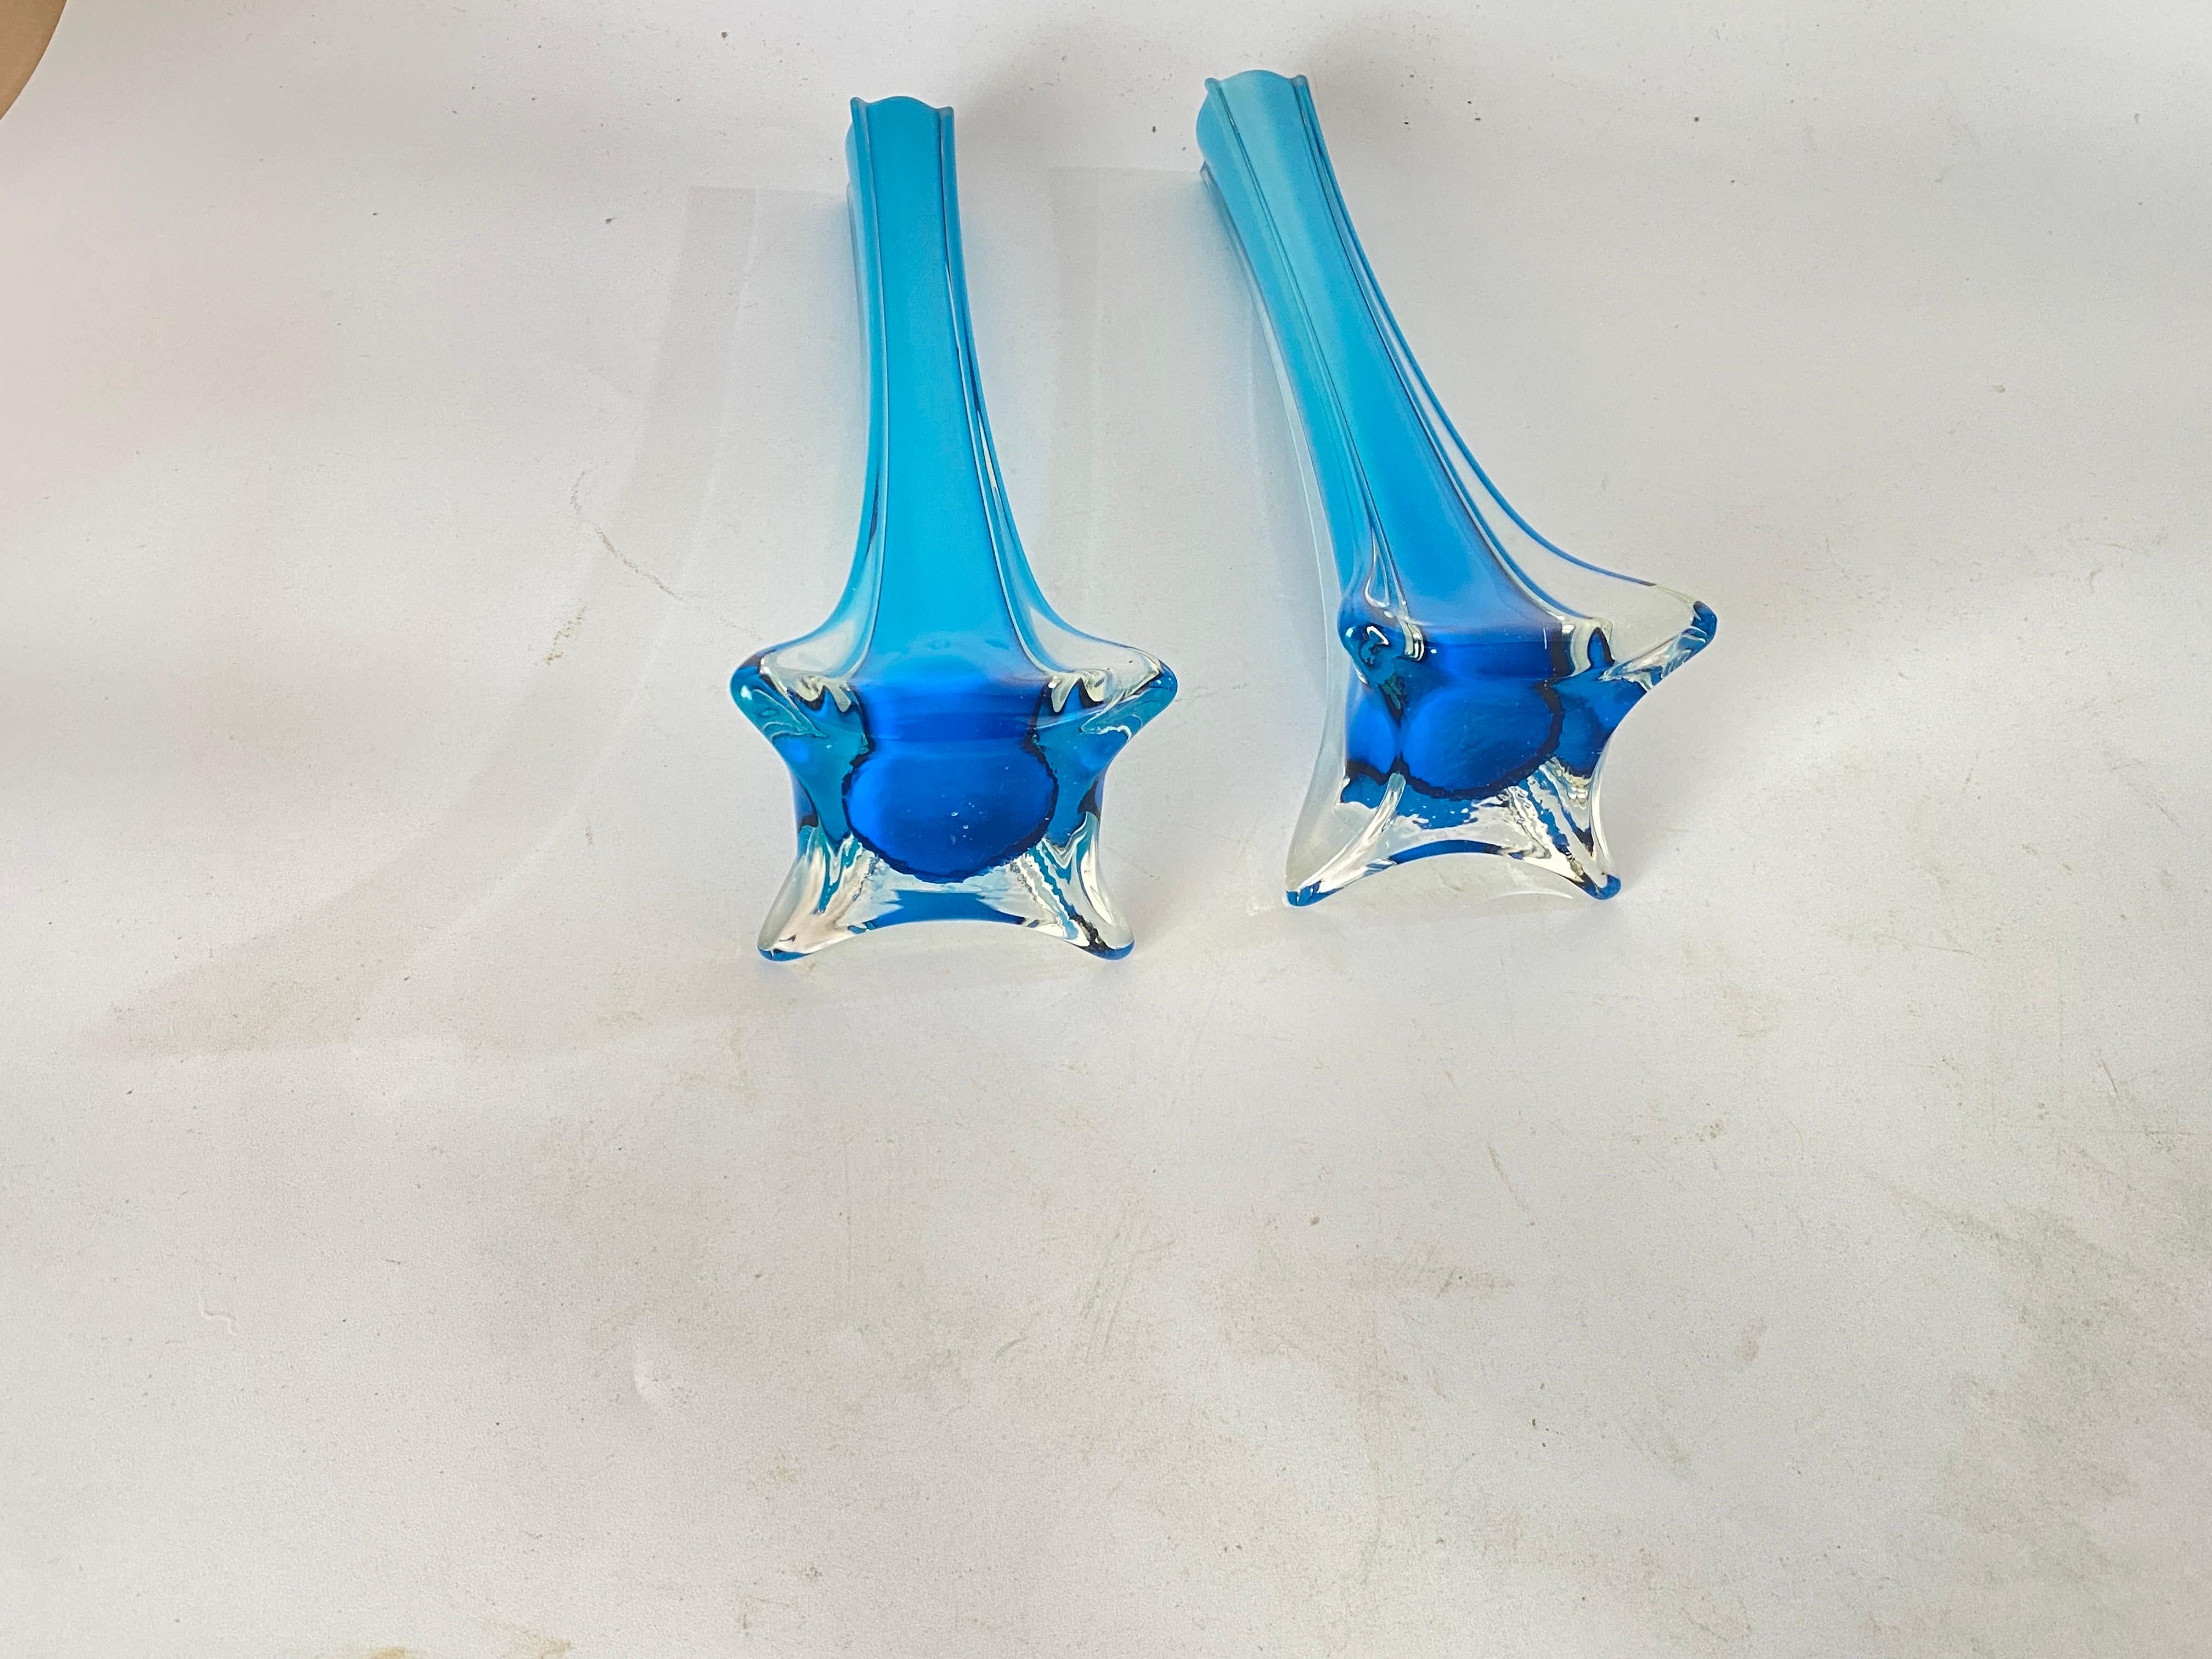 This glass decorative vases, has been made in France circa 1960. in a blue color.
They are soliflore Vases.